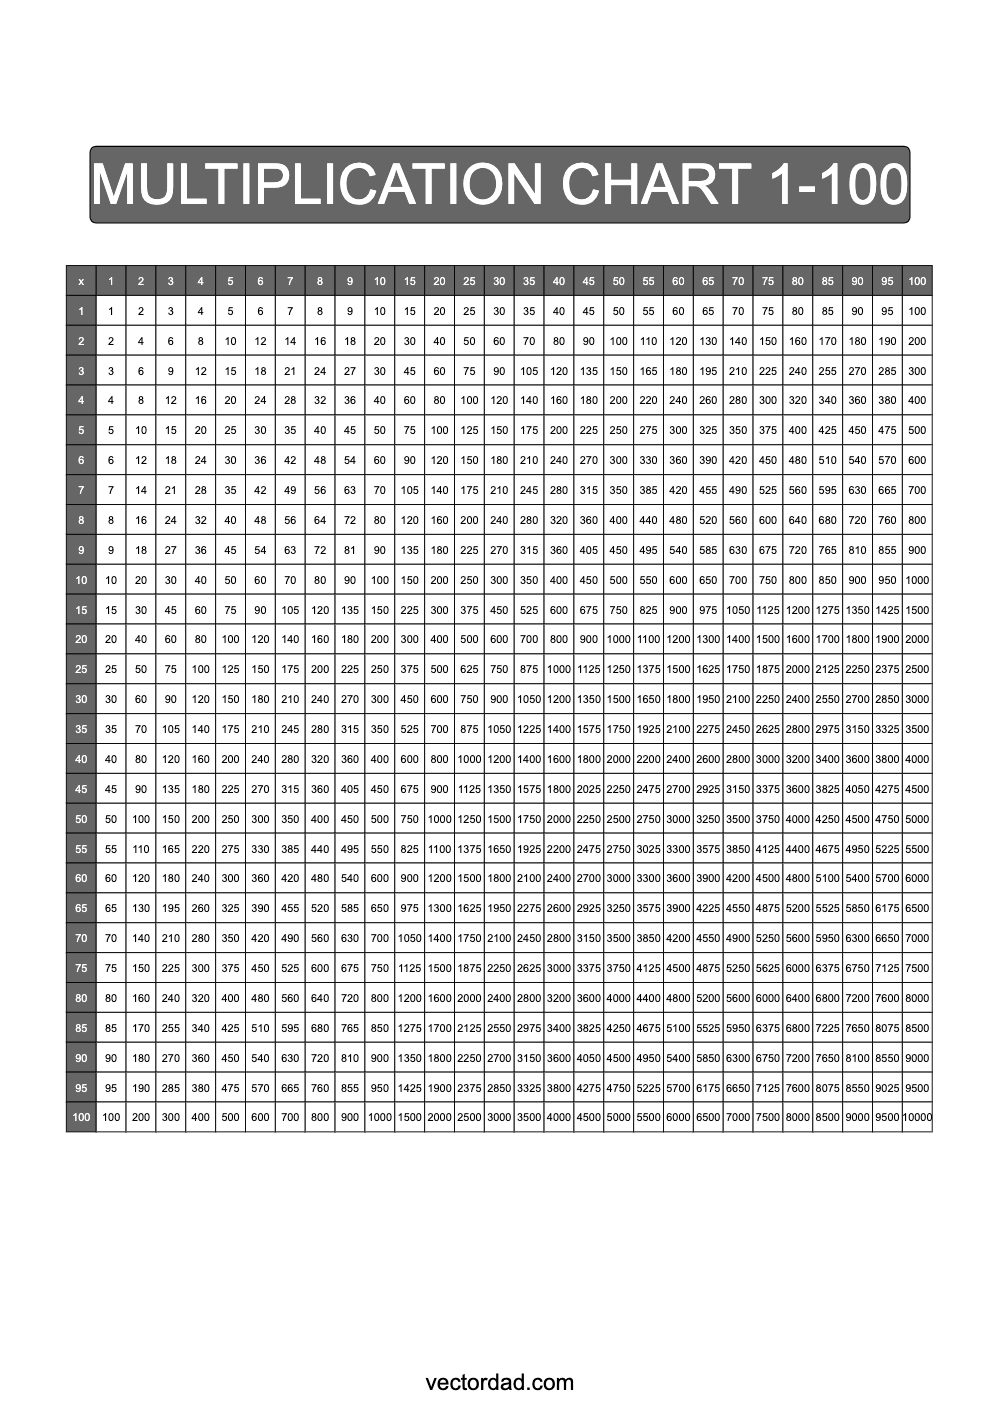 Grey Multiplication Chart Printable 1 to 100 portrait Free,prefilled, high quality, times table, sheet, pdf, svg, png, jpeg, svg, png, jpeg, 3rd grade, 4th grade, 5th grade, template, print, download, online, vertical